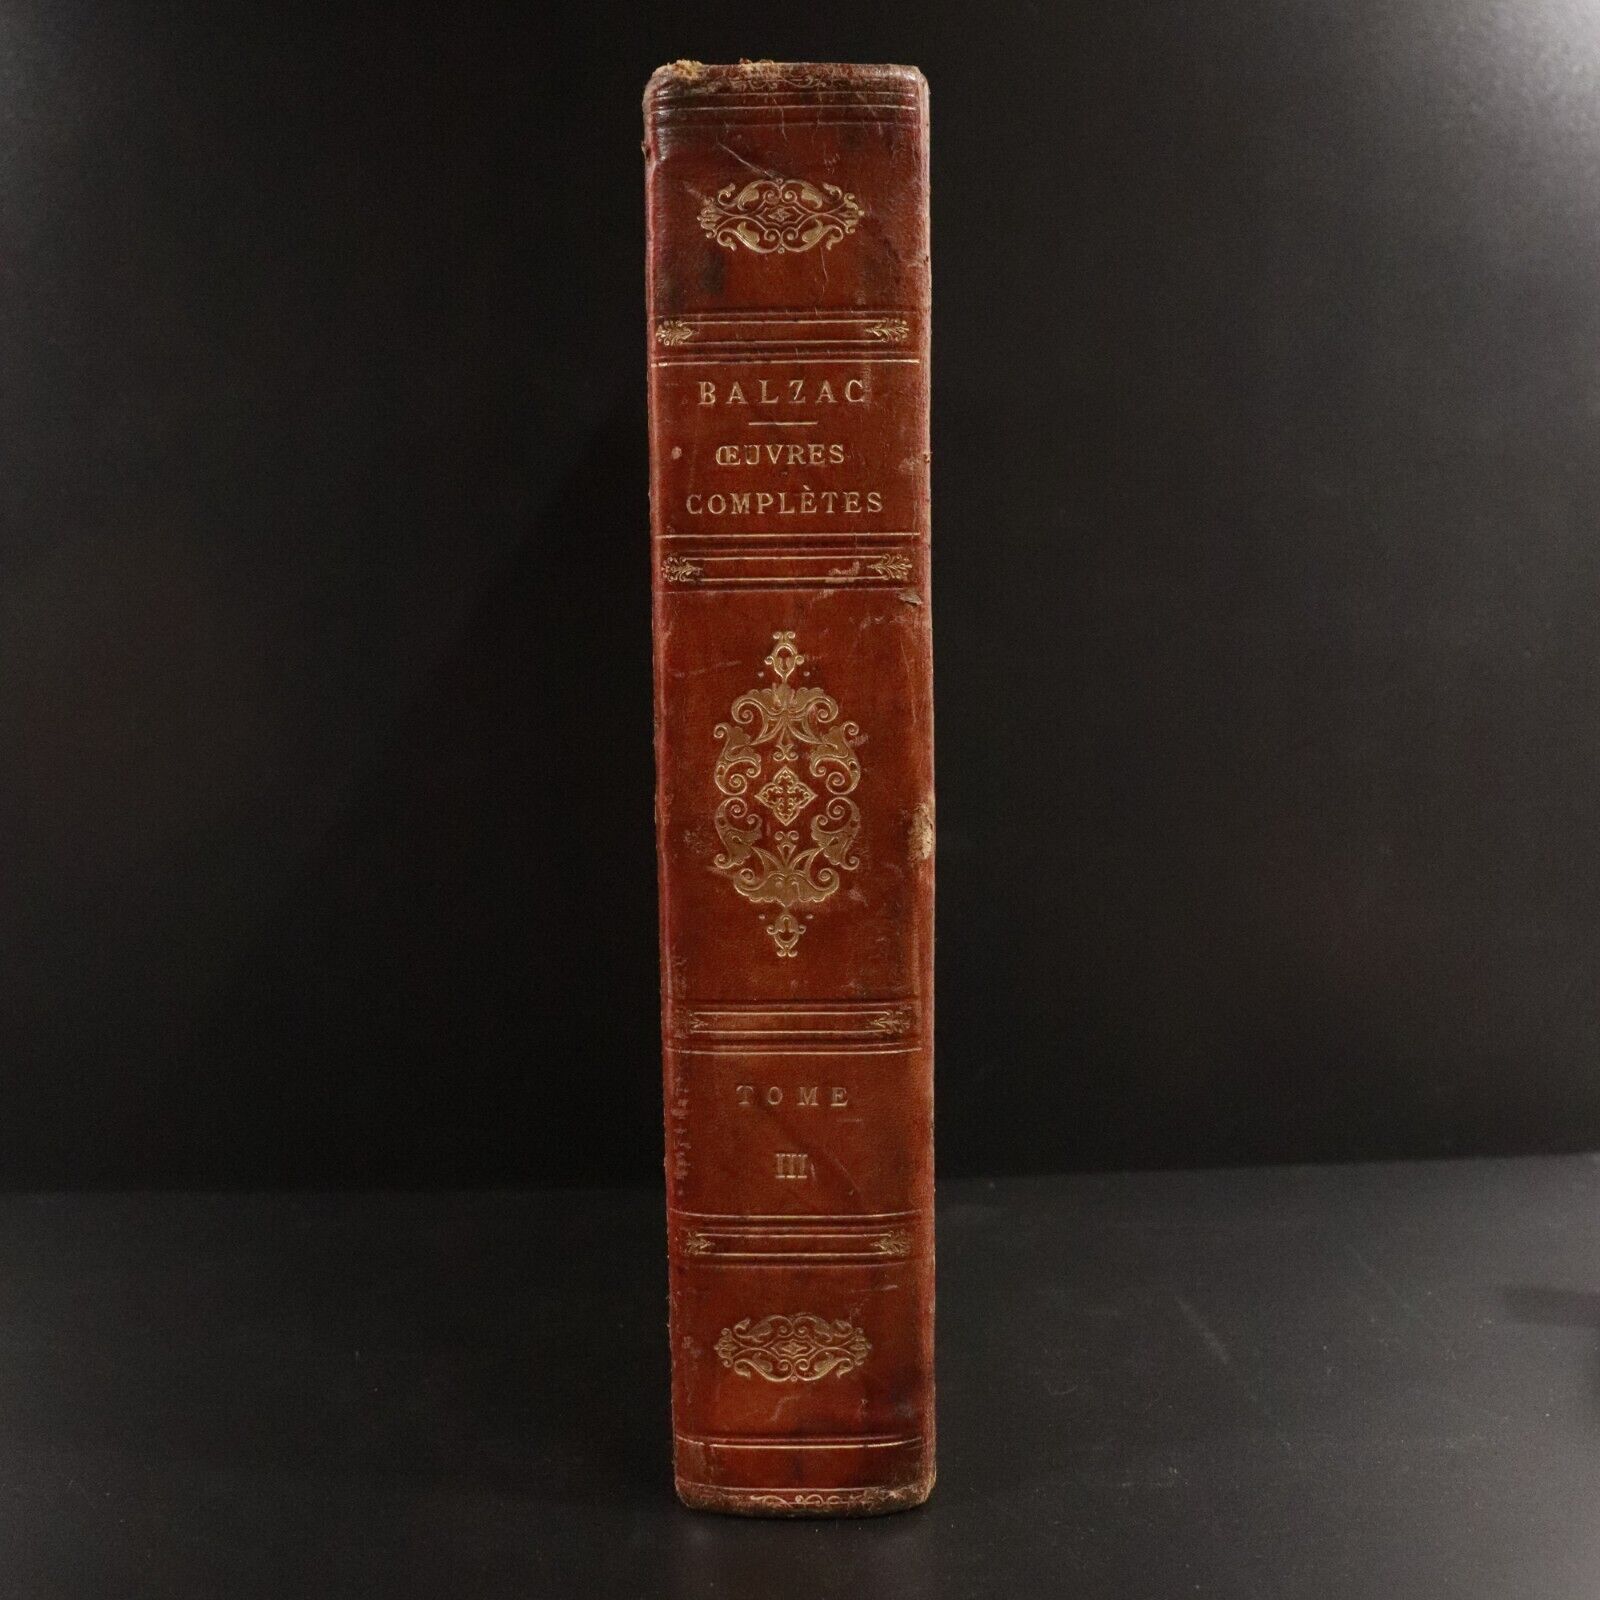 1911 Oevres Completes by H. De Balzac Antiquarian French Literature Books